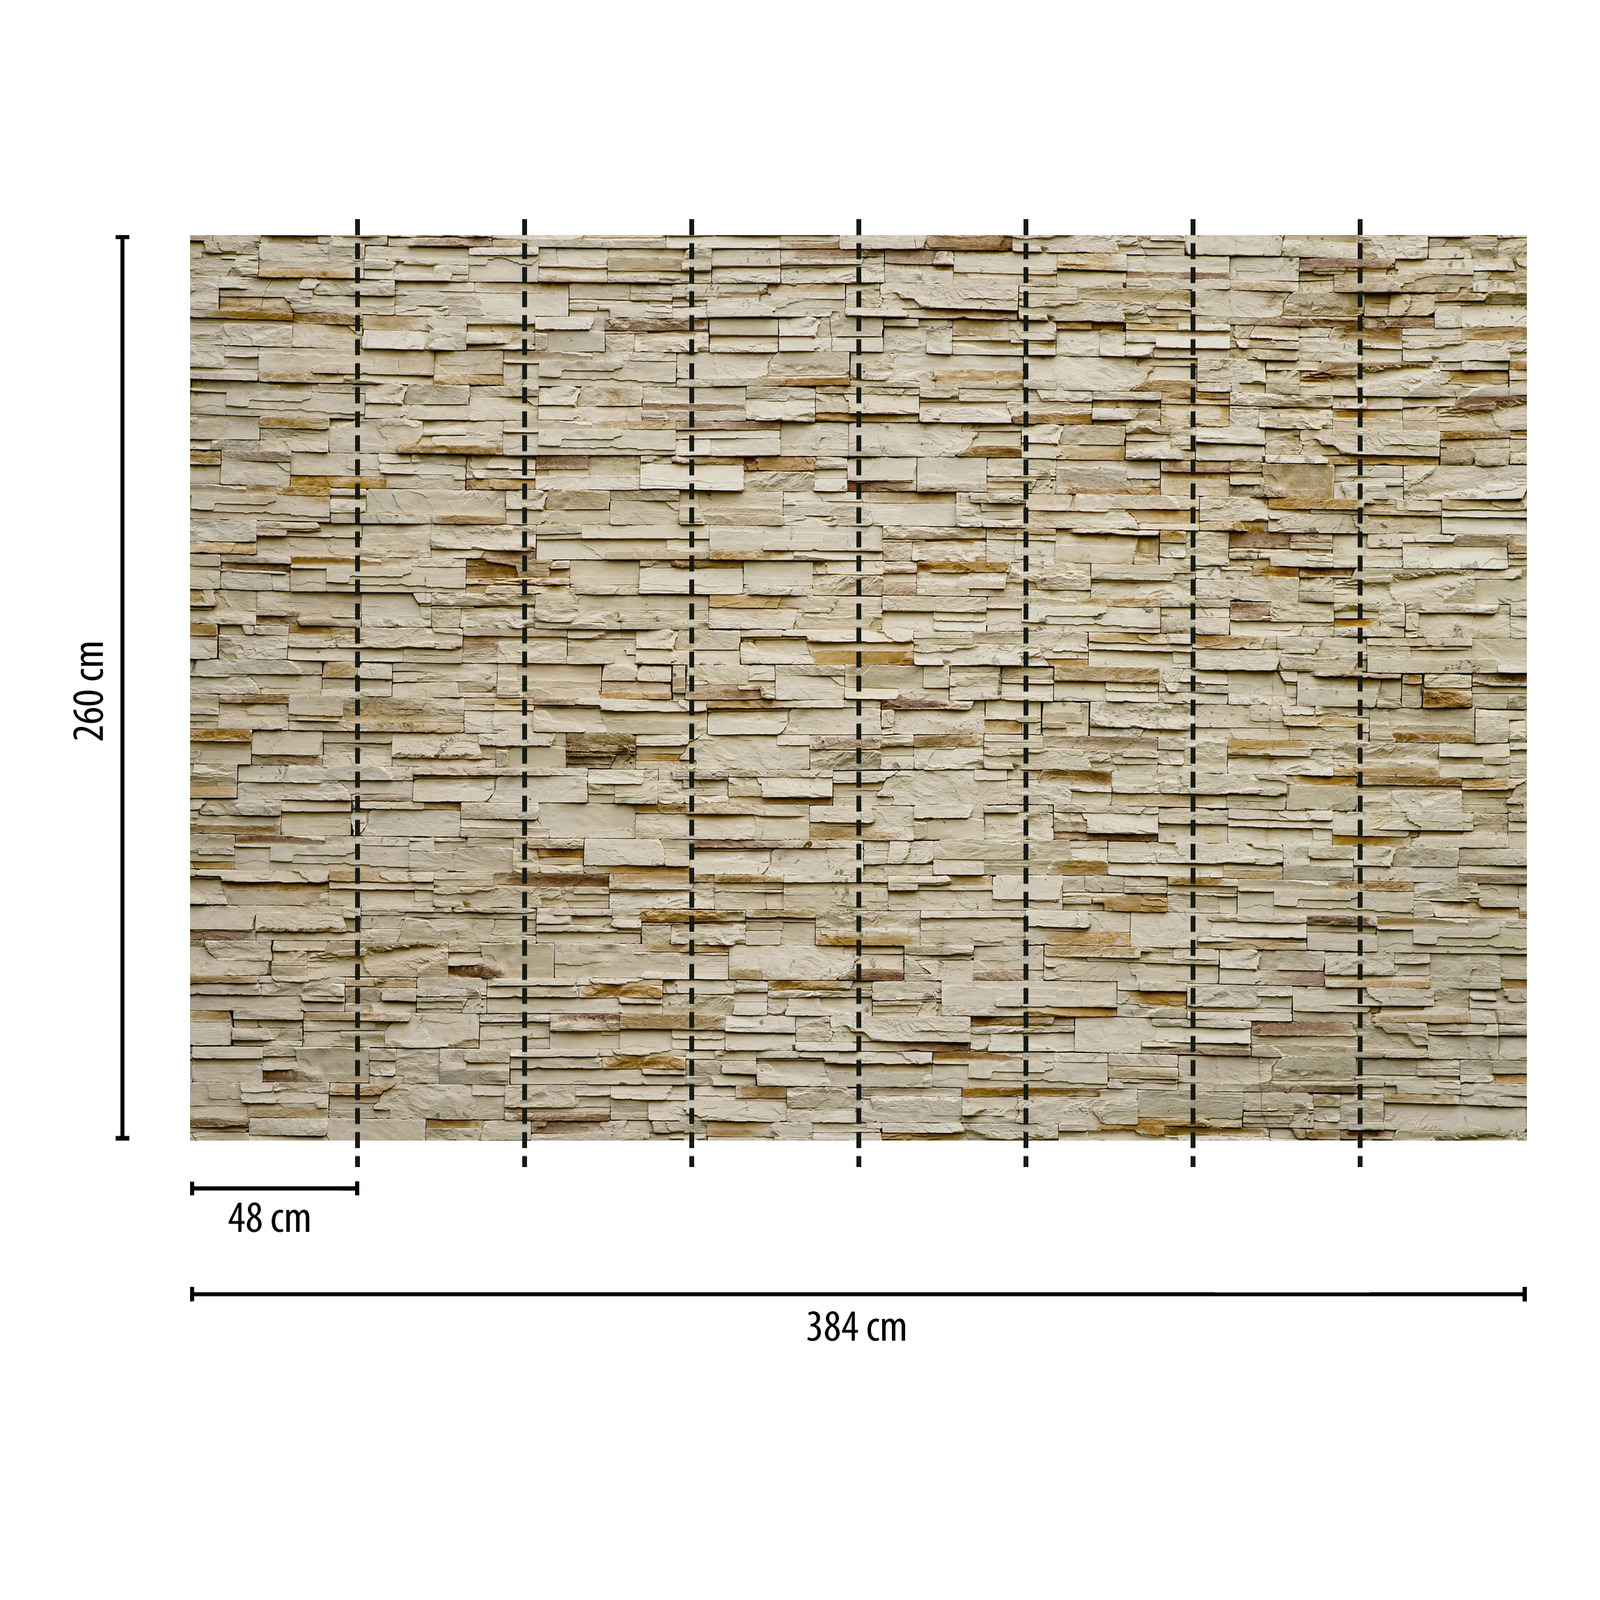             Photo wallpaper nature stone wall look - beige
        